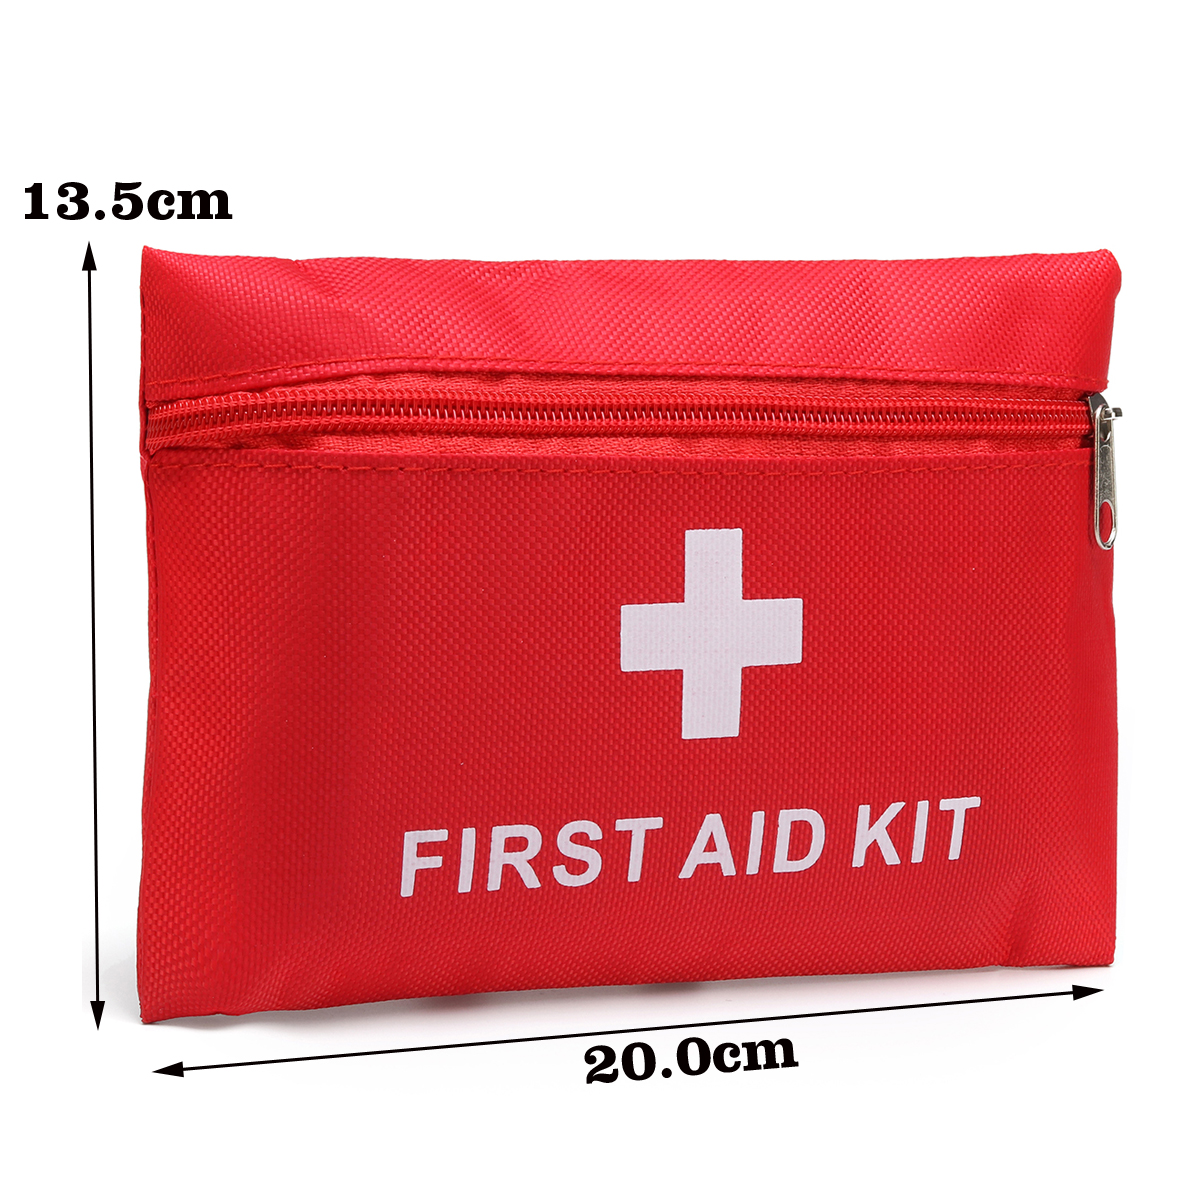 Emergency-First-Aid-Kit-39-Piece-Survival-Supplies-Bag-for-Car-Travel-Home-Emergency-Box-1420492-9